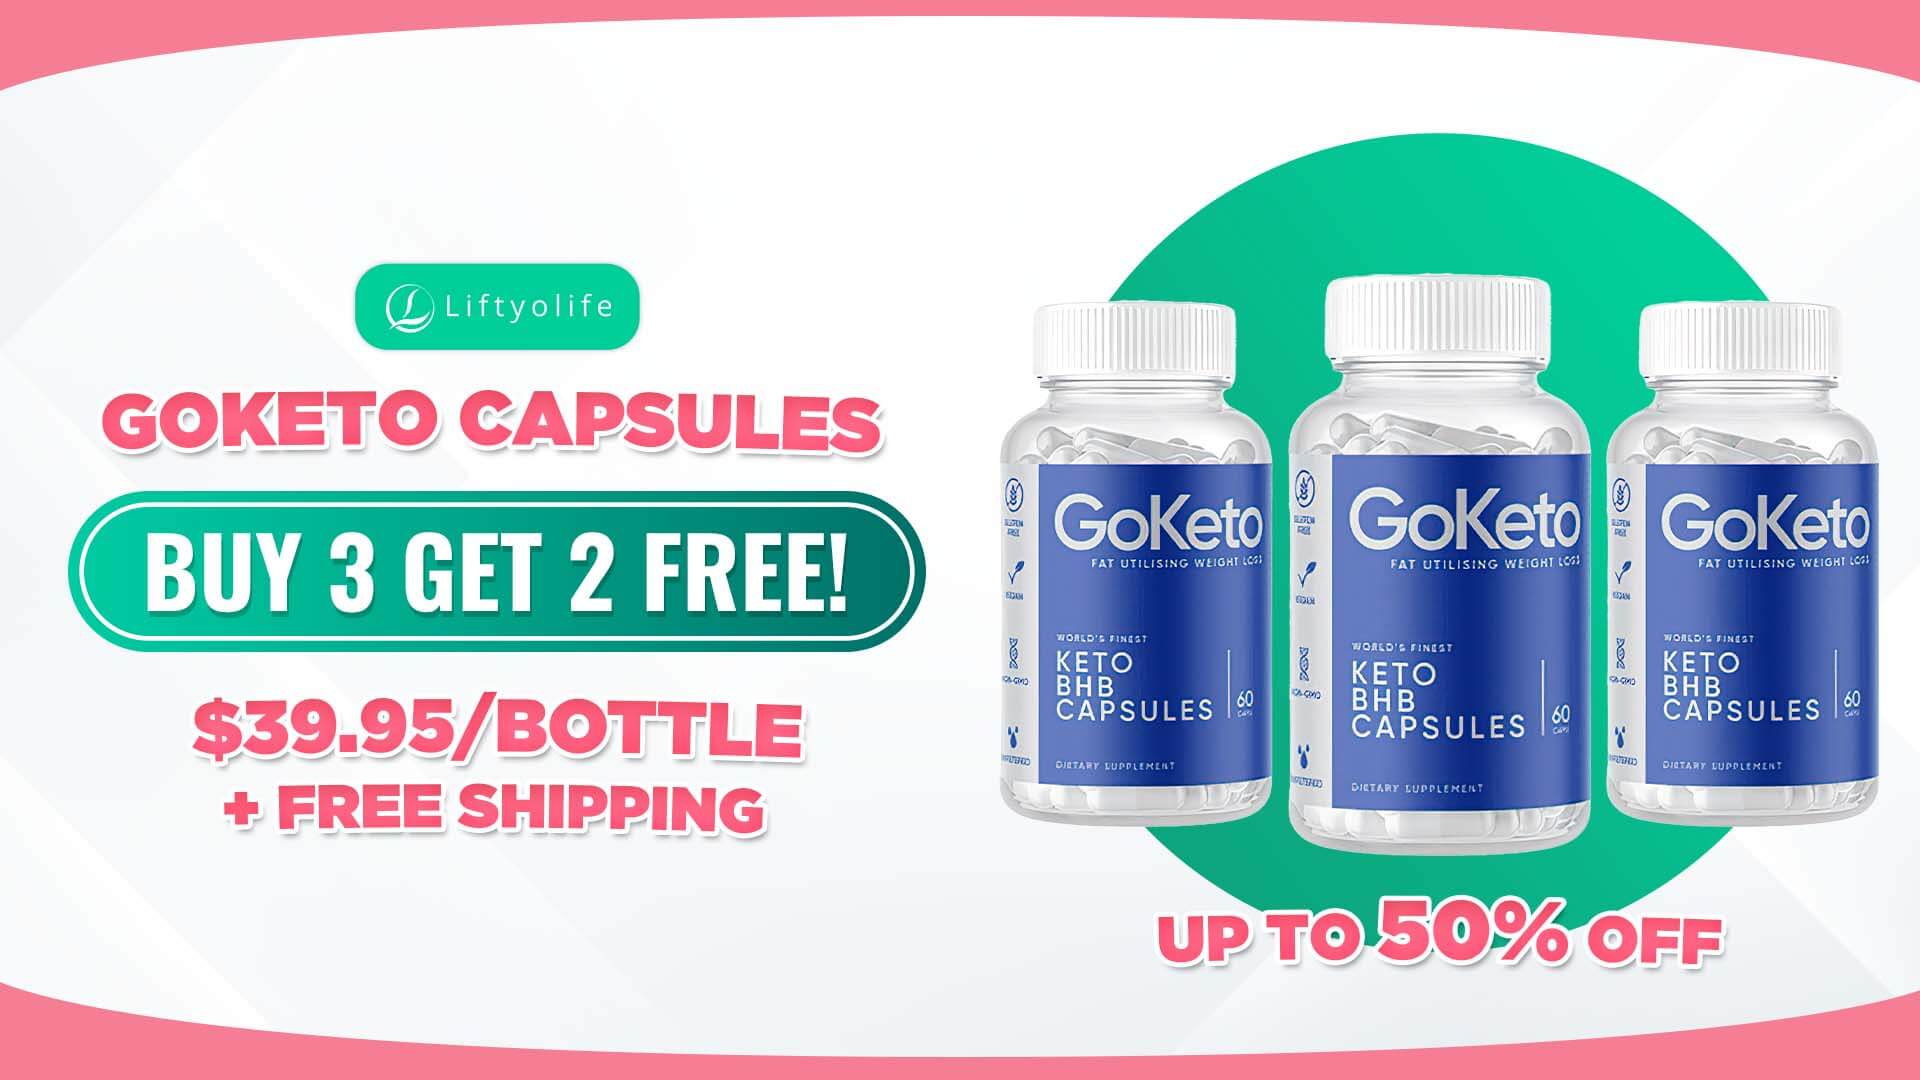 How Much Does GoKeto Capsules Cost